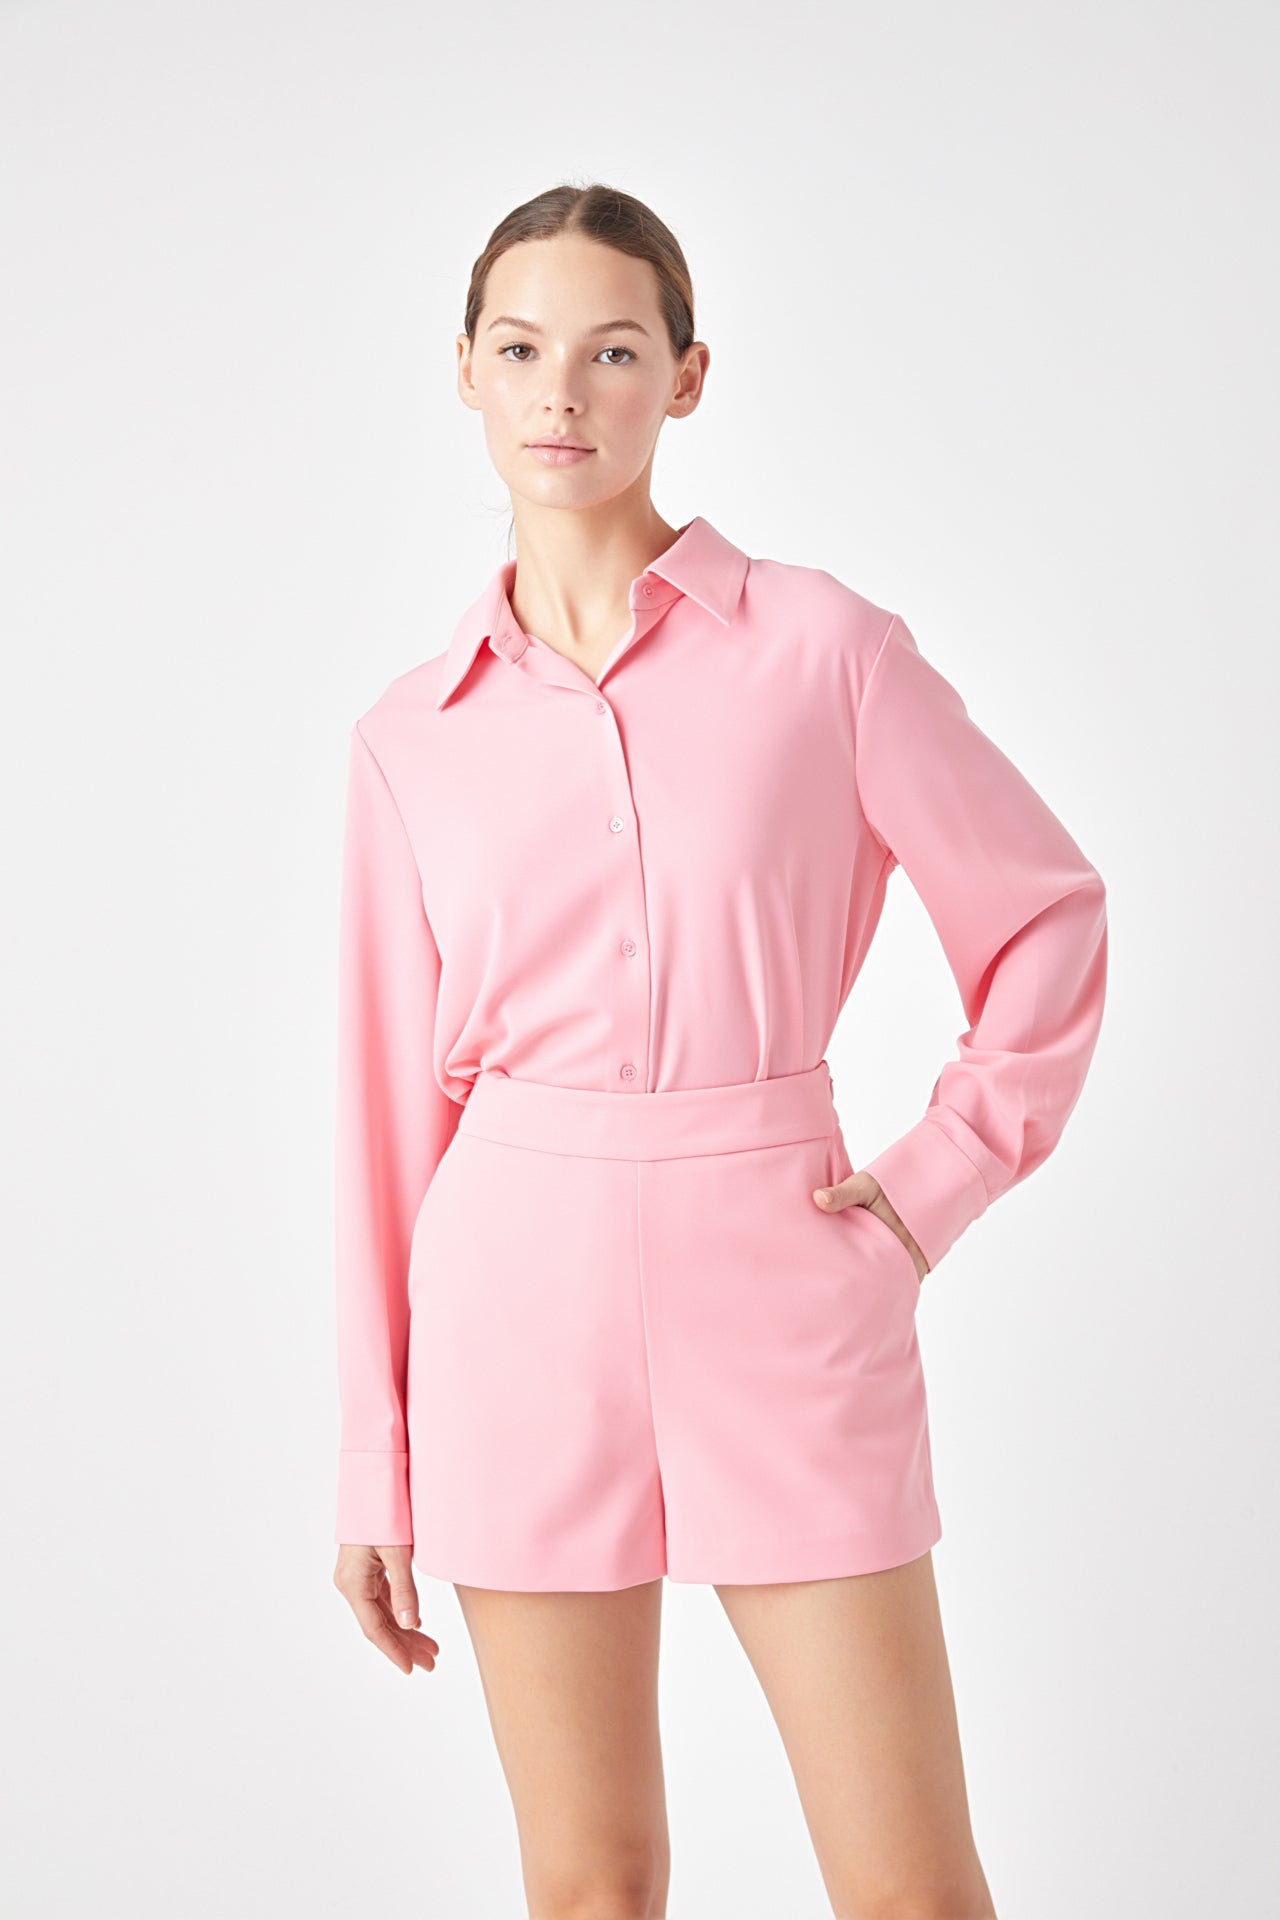 ENDLESS ROSE - Shirt Blouse - SHIRTS & BLOUSES available at Objectrare